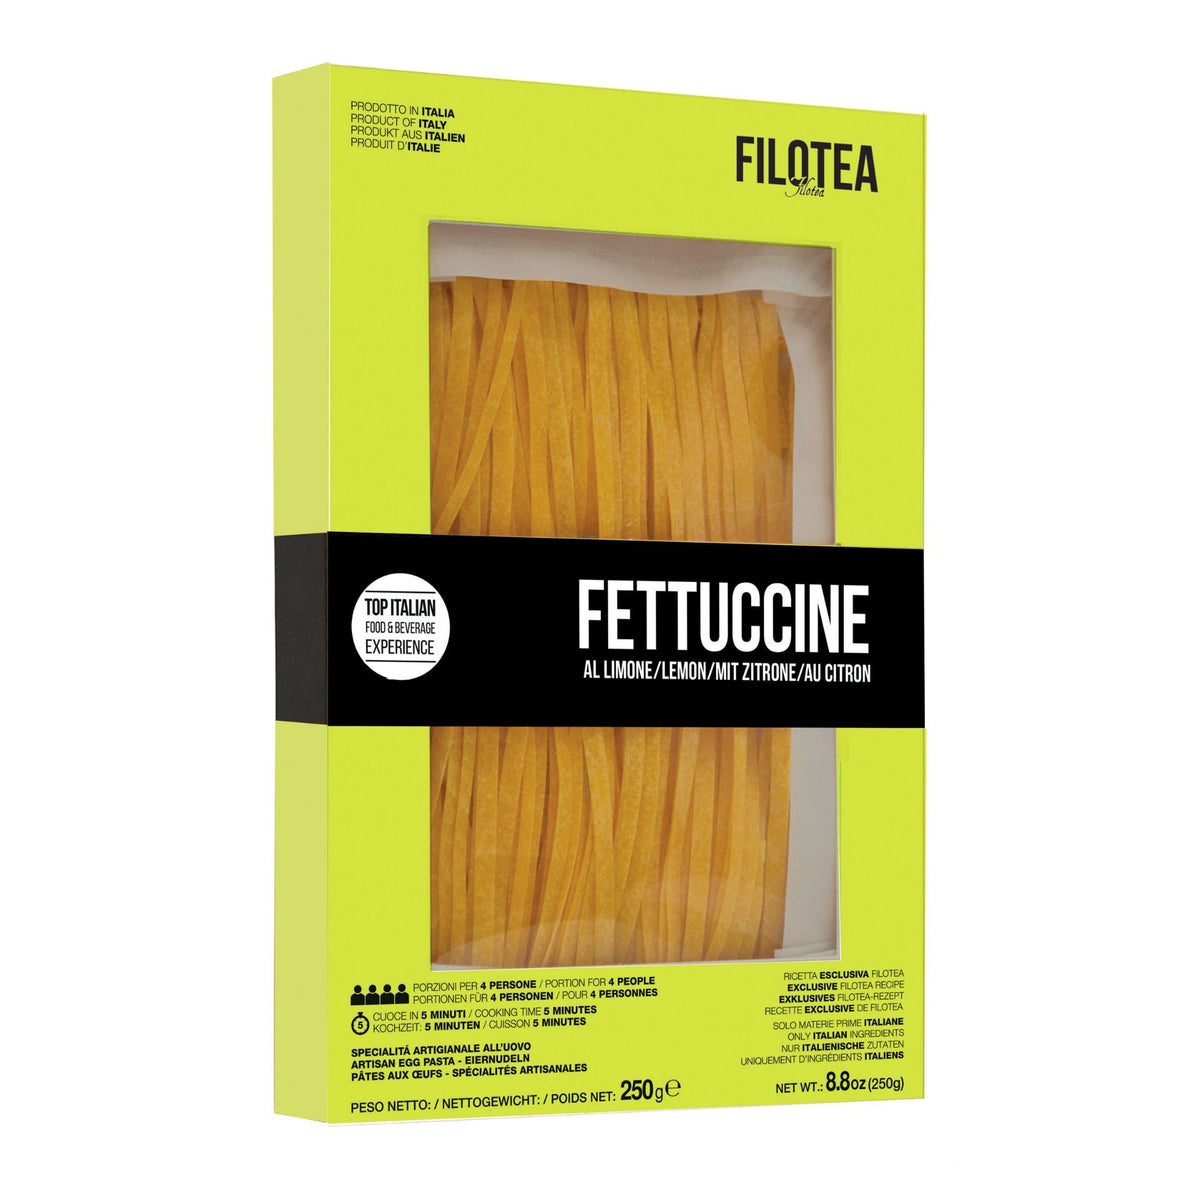 Filotea Lemon Fettuccine Artisan Egg Pasta 250g  | Imported and distributed in the UK by Just Gourmet Foods